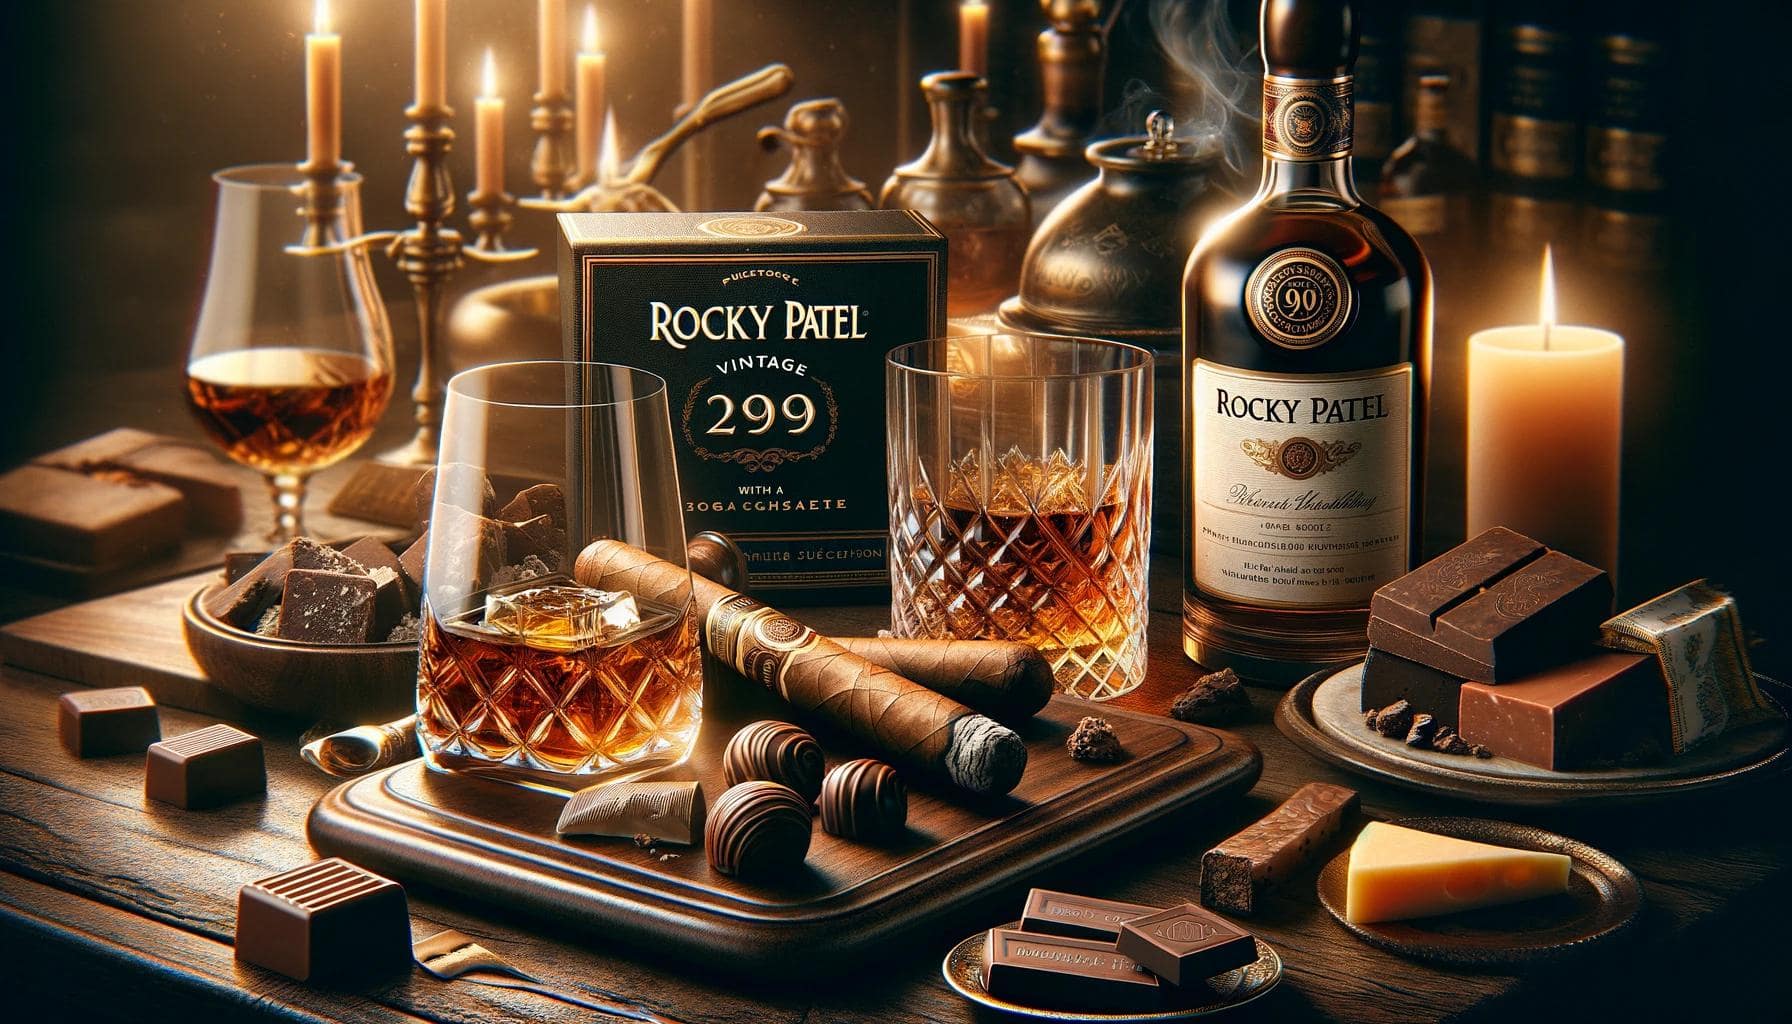 What to Pair with Rocky Patel Vintage 1999 